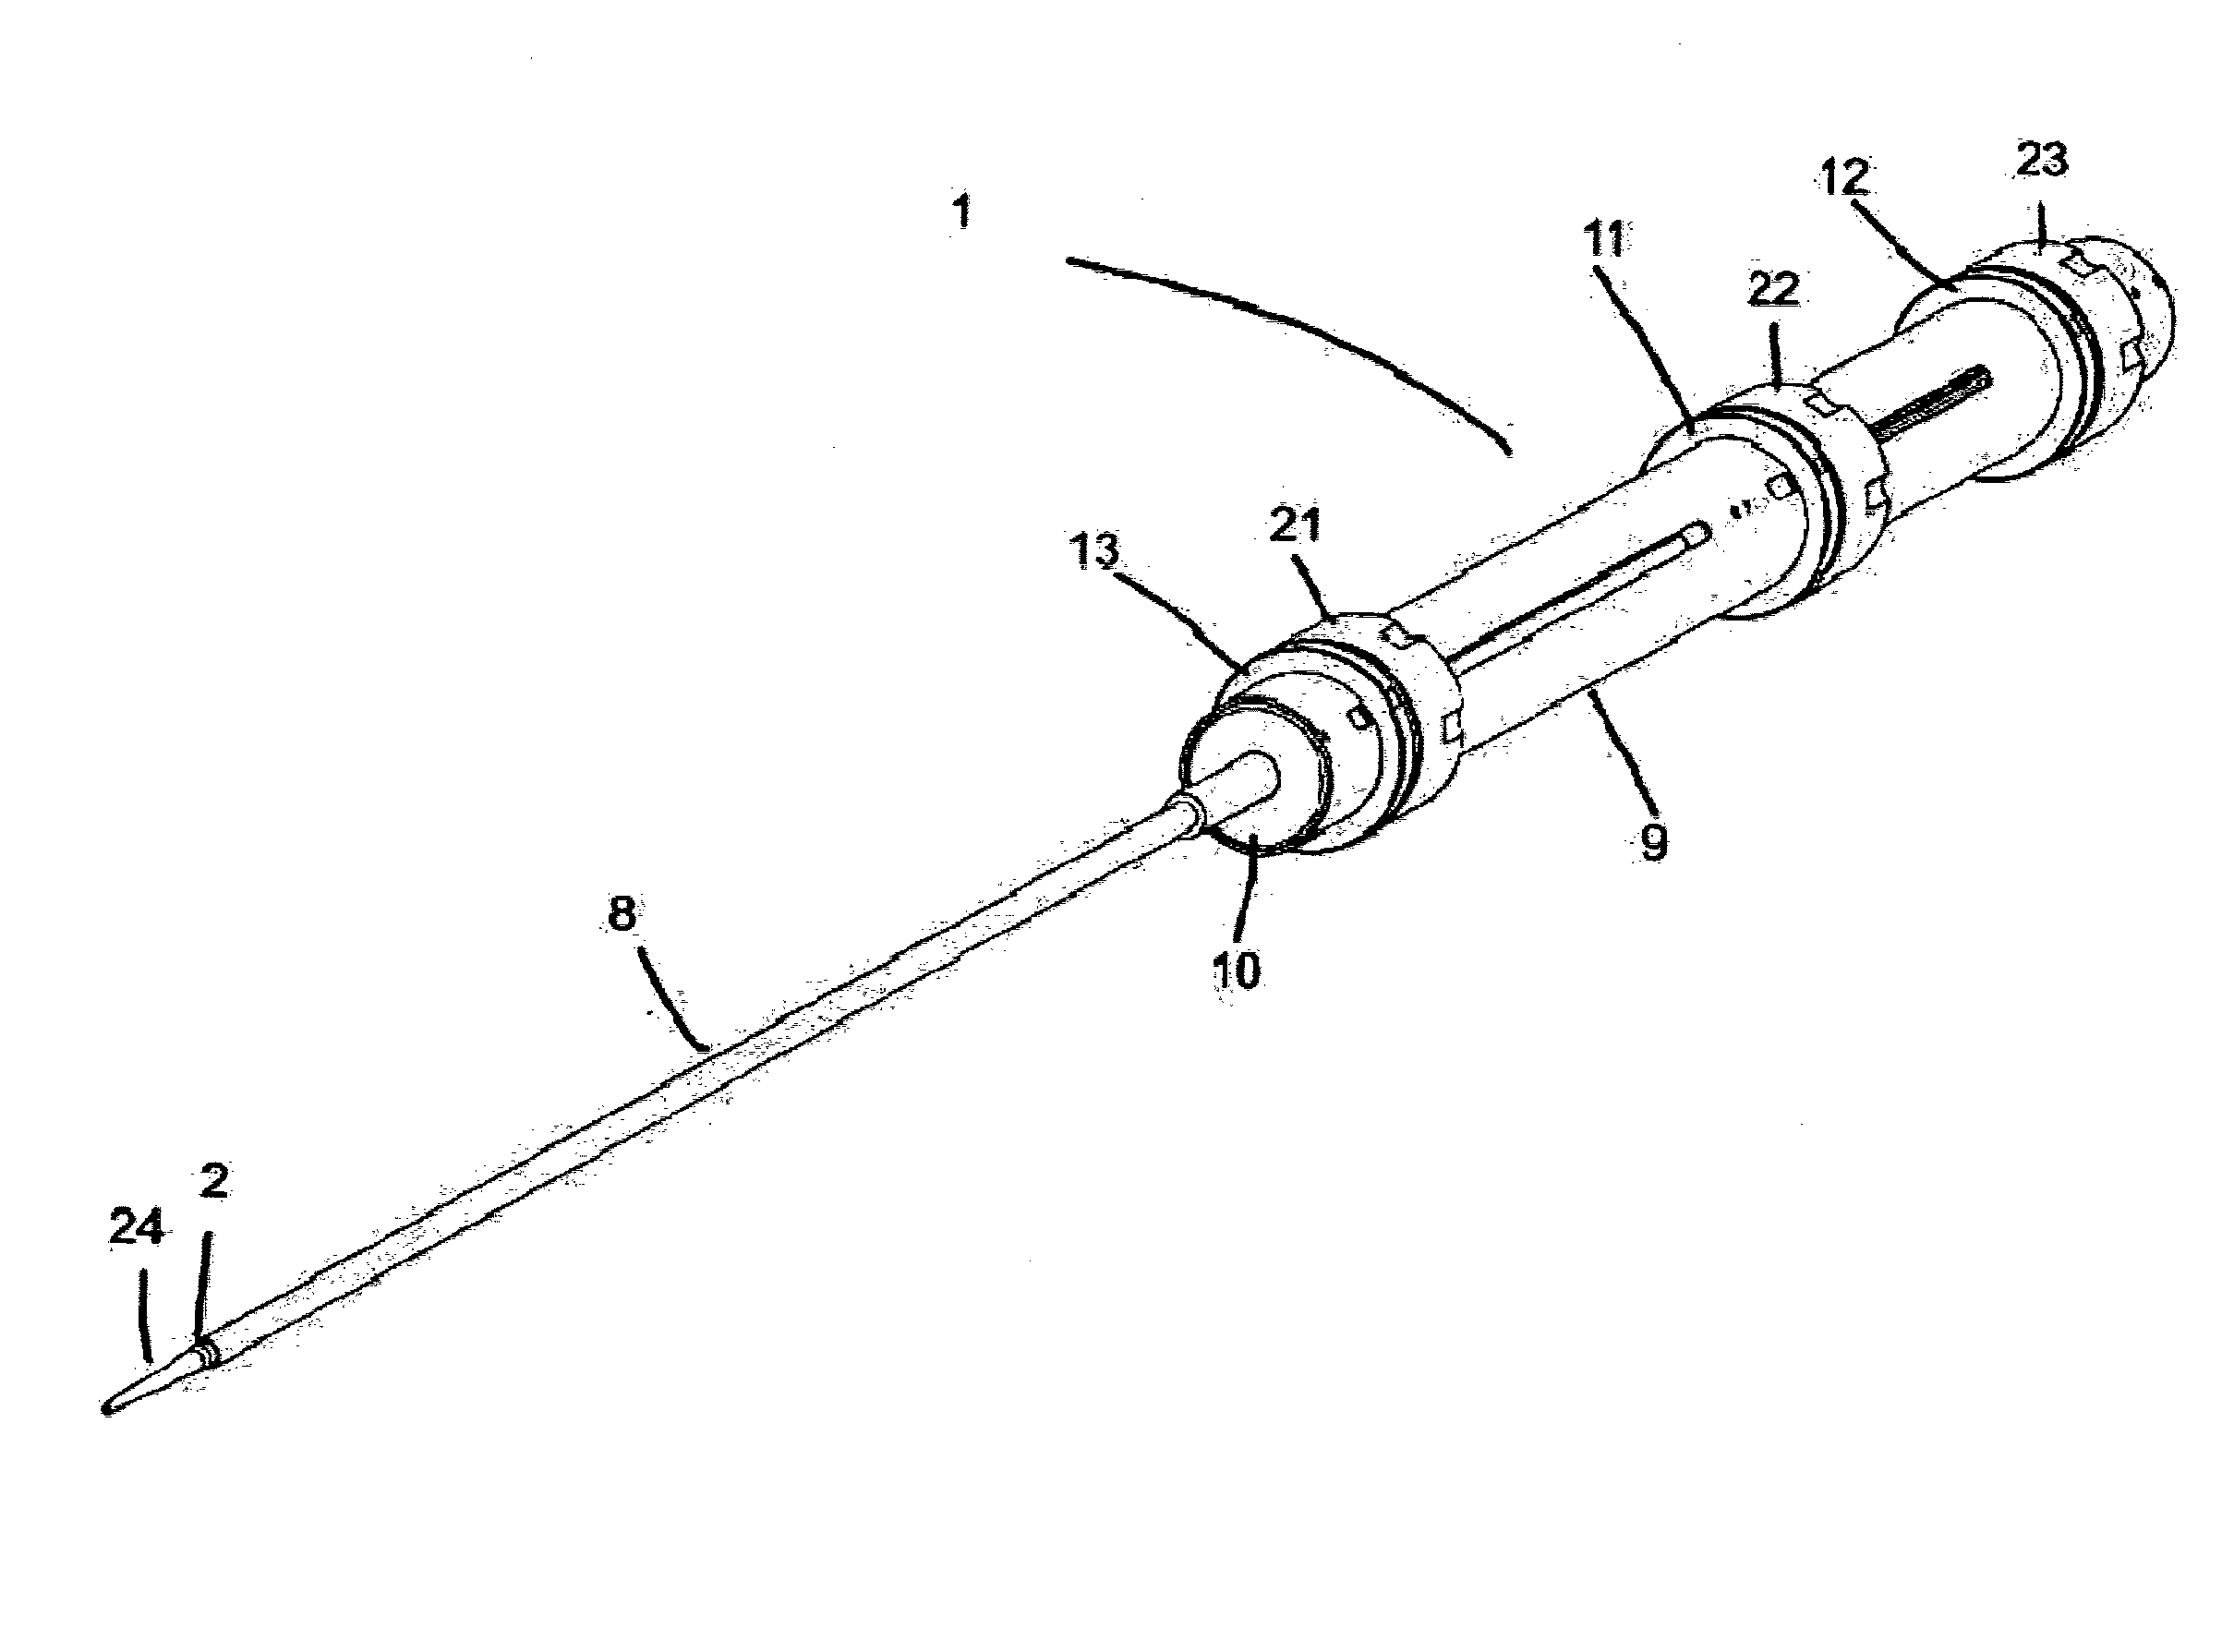 Mechanism for Guiding and or Releasing of an Endoprosthesis with Injured Regions of a Blood Vessel, Applied in Catheter-Like Medical Device